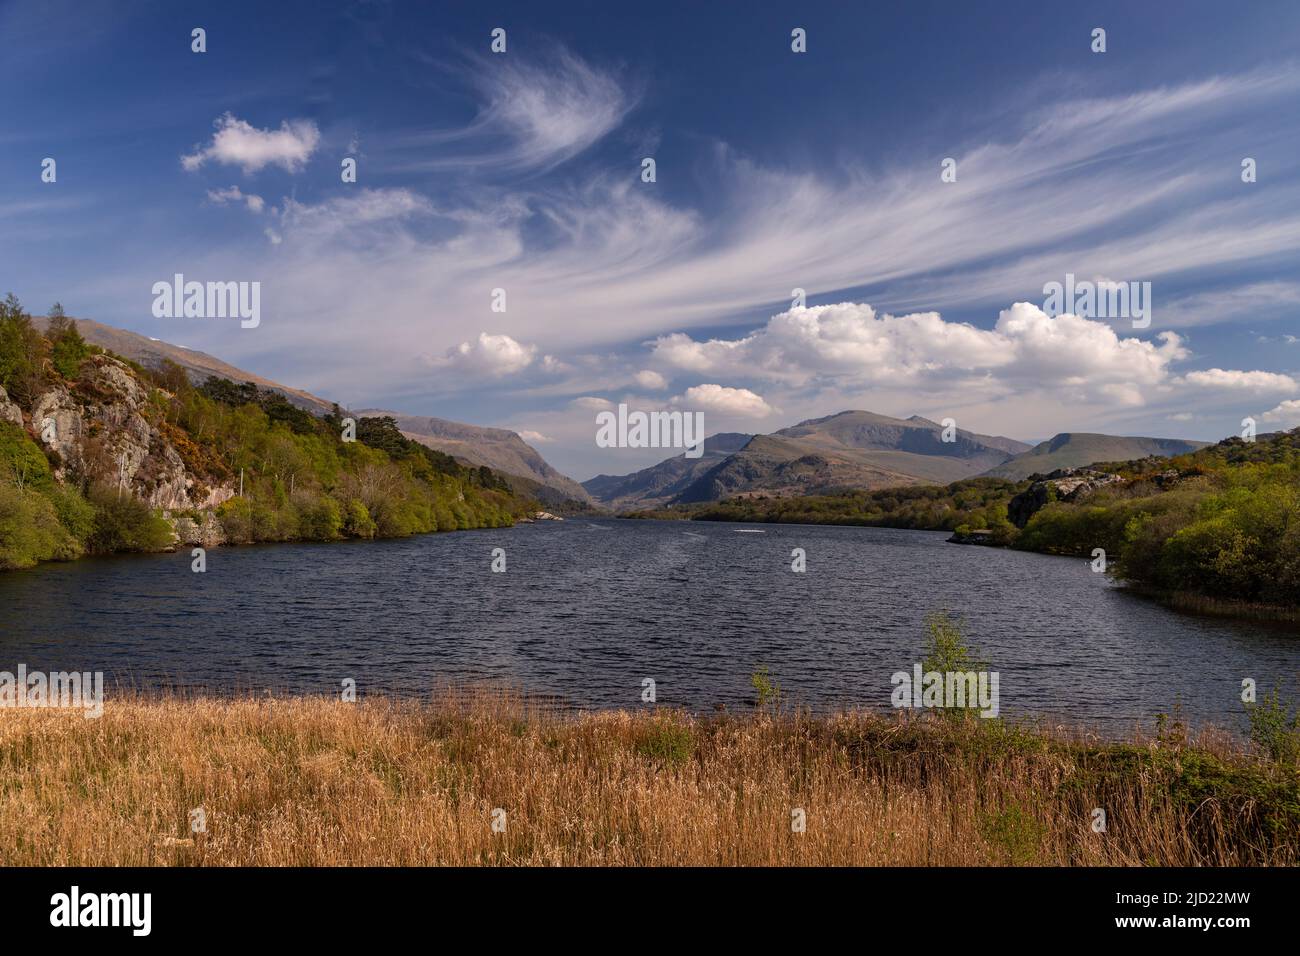 Llyn Padarn in the Snowdonia National Park, North wales Stock Photo